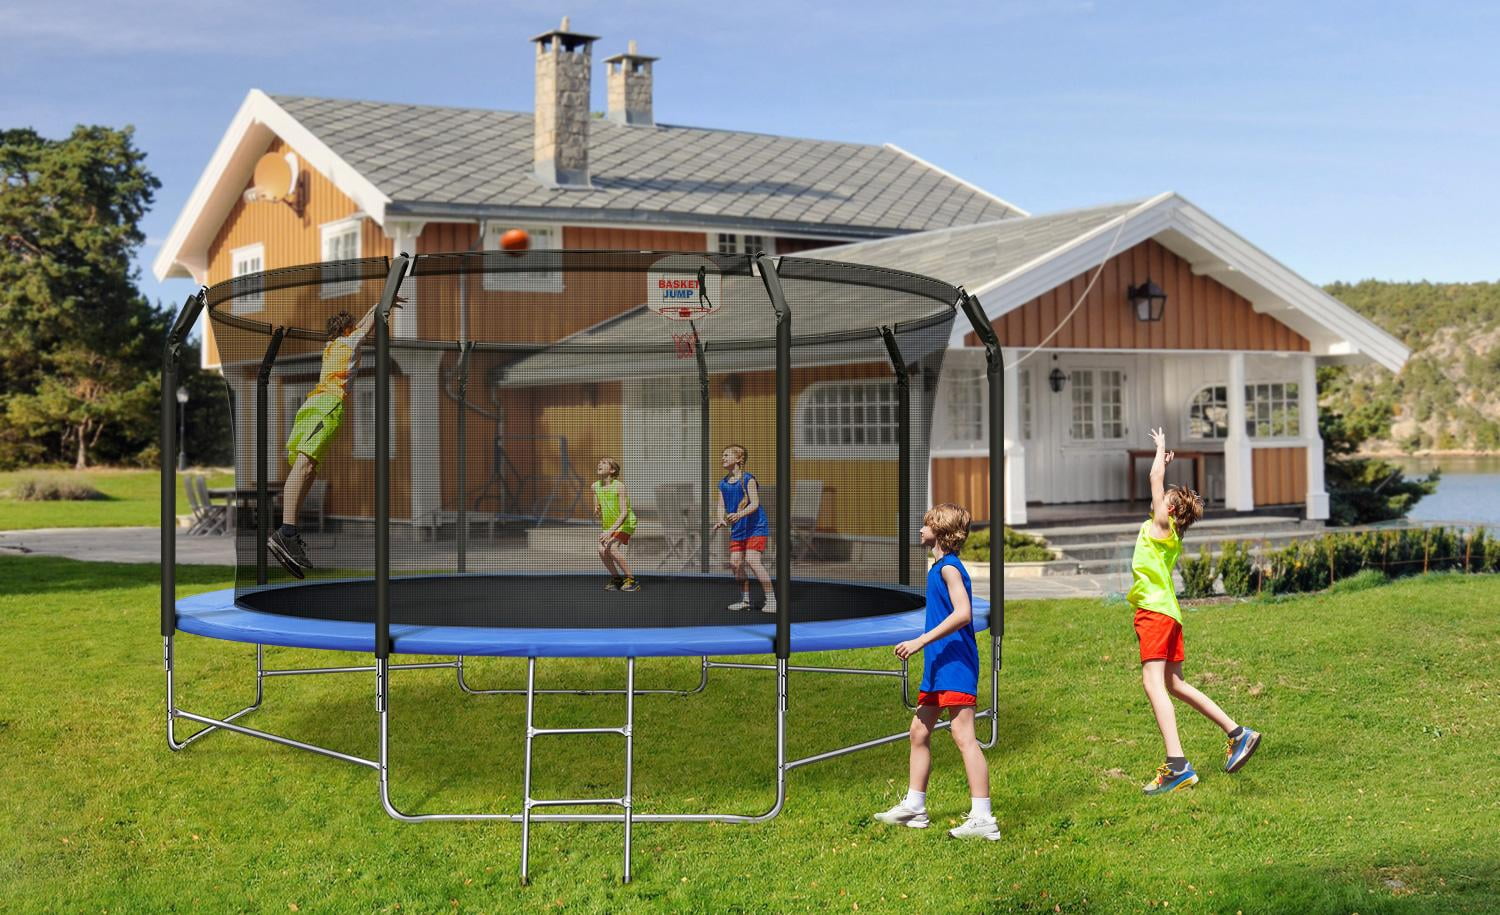 Green Hootata 14FT Trampoline with Enclosure Net Large Trampoline with Basketball Hoop and Ladder Capacity for 6-9 Kids and Adults Outdoor Backyard Trampoline for All Ages 